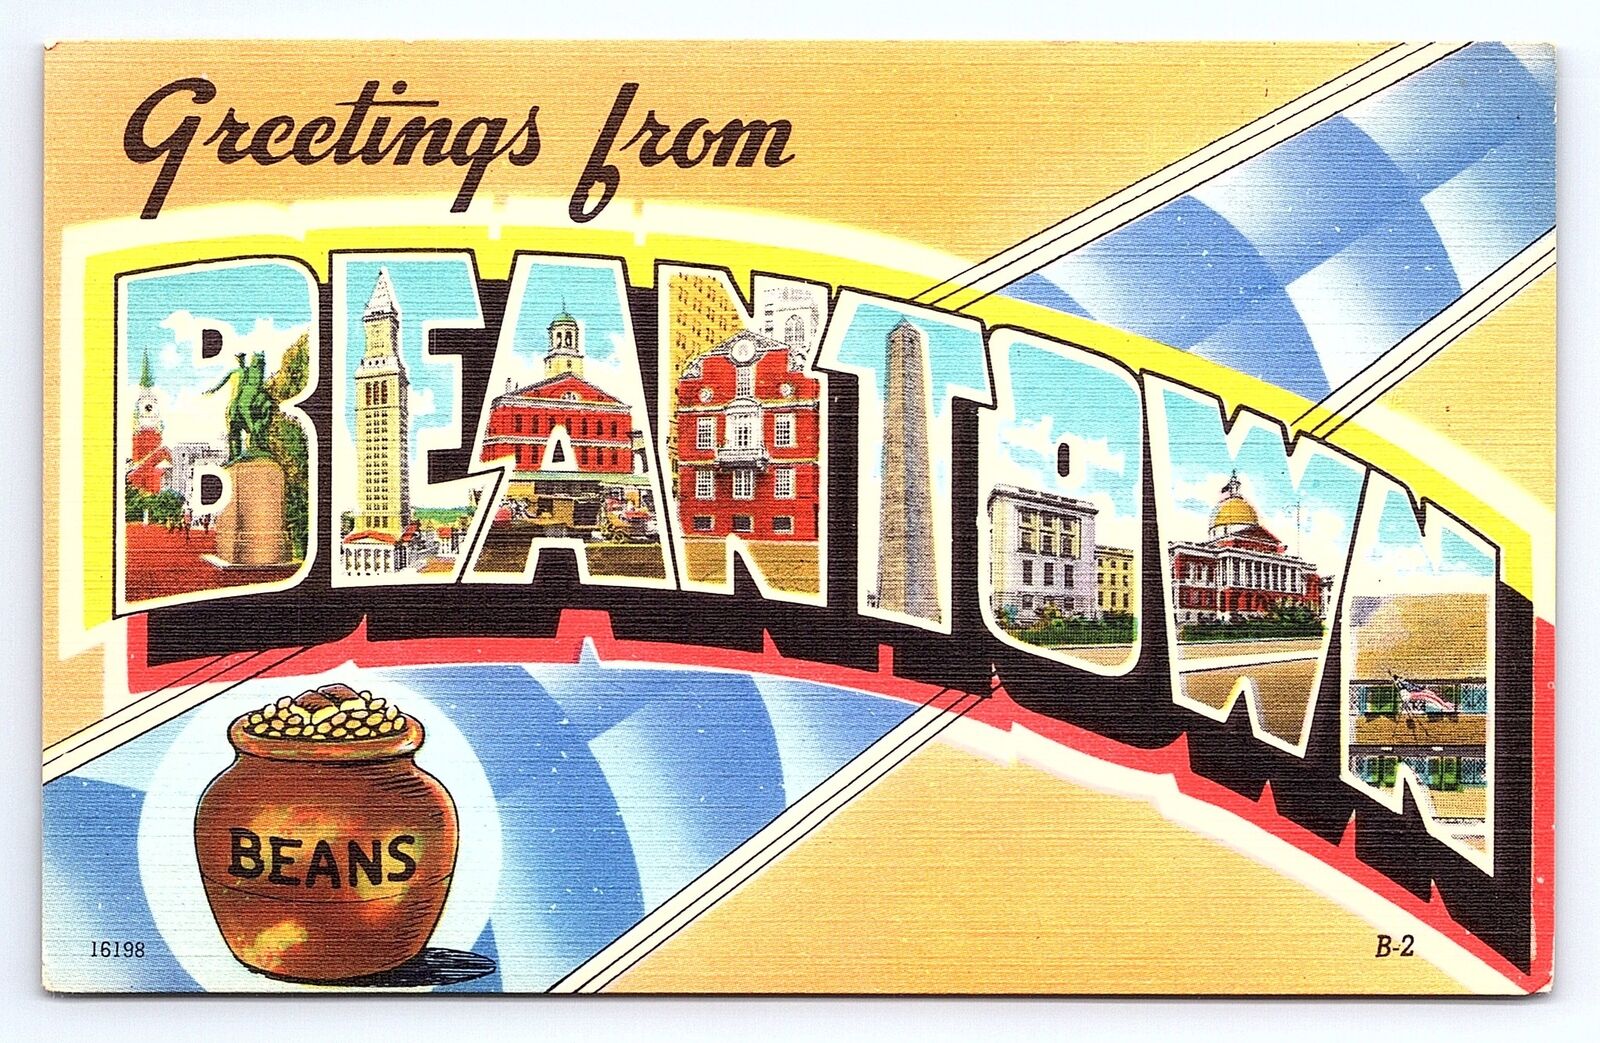 Postcard Greetings From Beantown Boston Large Letter Greetings Colourpicture